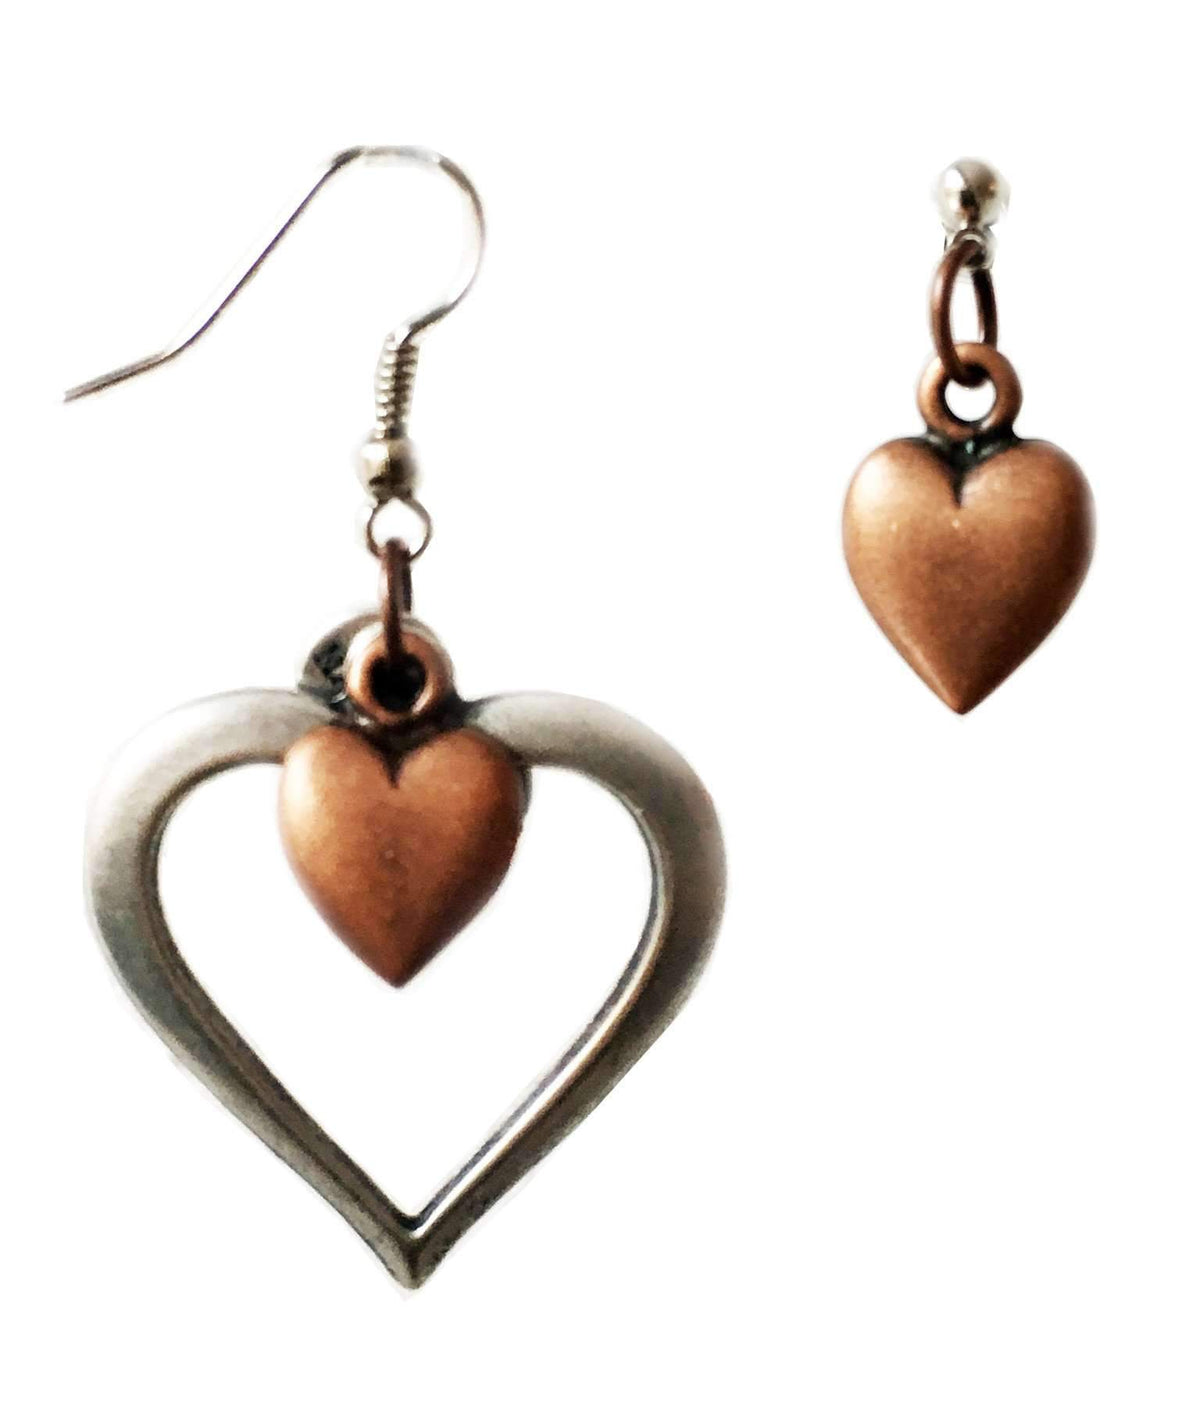 Heart cluster earrings in brass and silver. Perfect for valentines